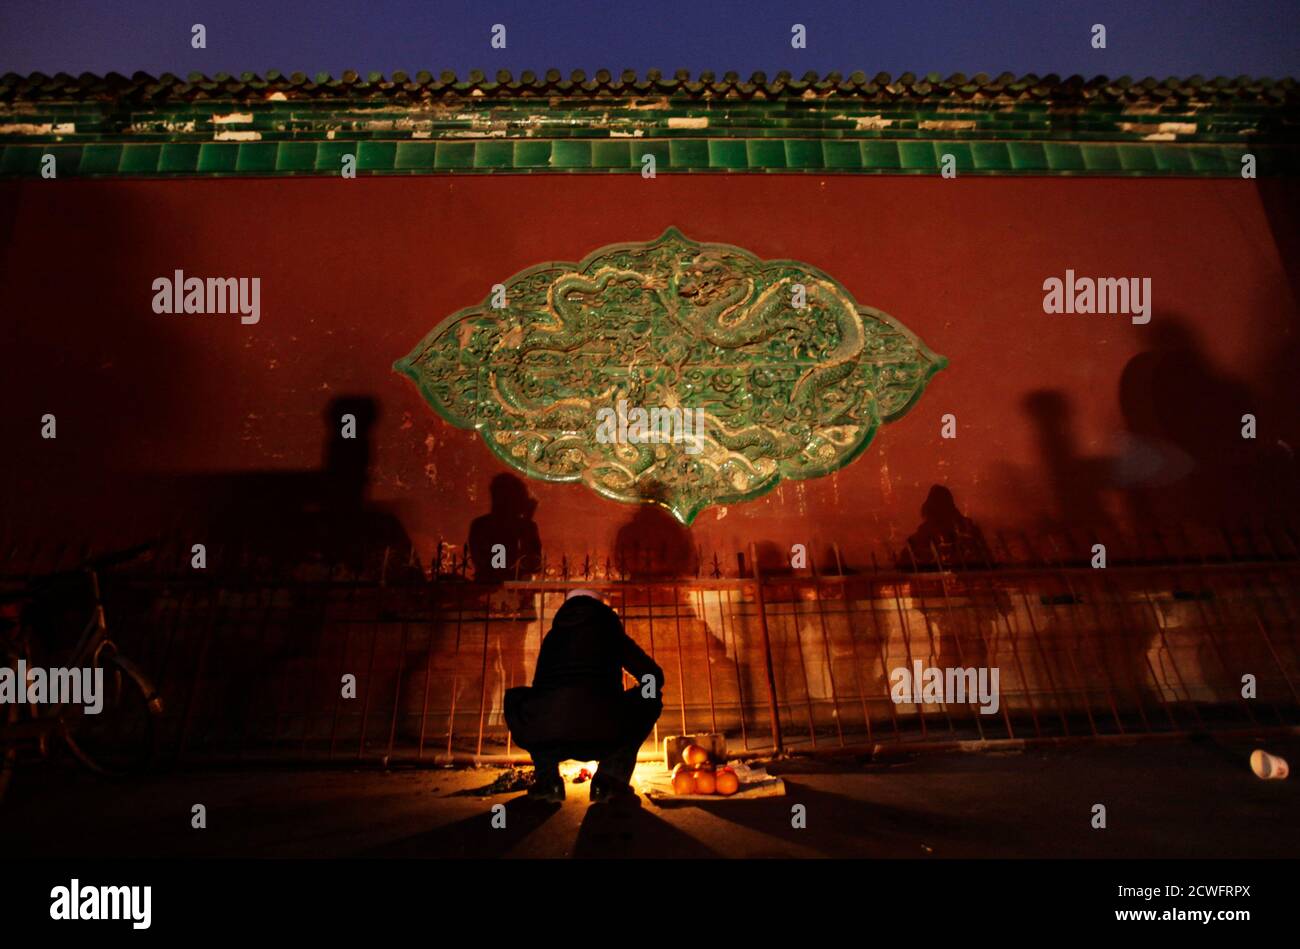 A local resident burns offerings as he prays for good fortune at Dafo temple on the eve of the Lantern Festival, the last day of Chinese Lunar New Year celebrations, in Zhengding County, Hebei province, February 5 , 2012. REUTERS/Jason Lee (CHINA - Tags: SOCIETY ANNIVERSARY TPX IMAGES OF THE DAY) Stock Photo